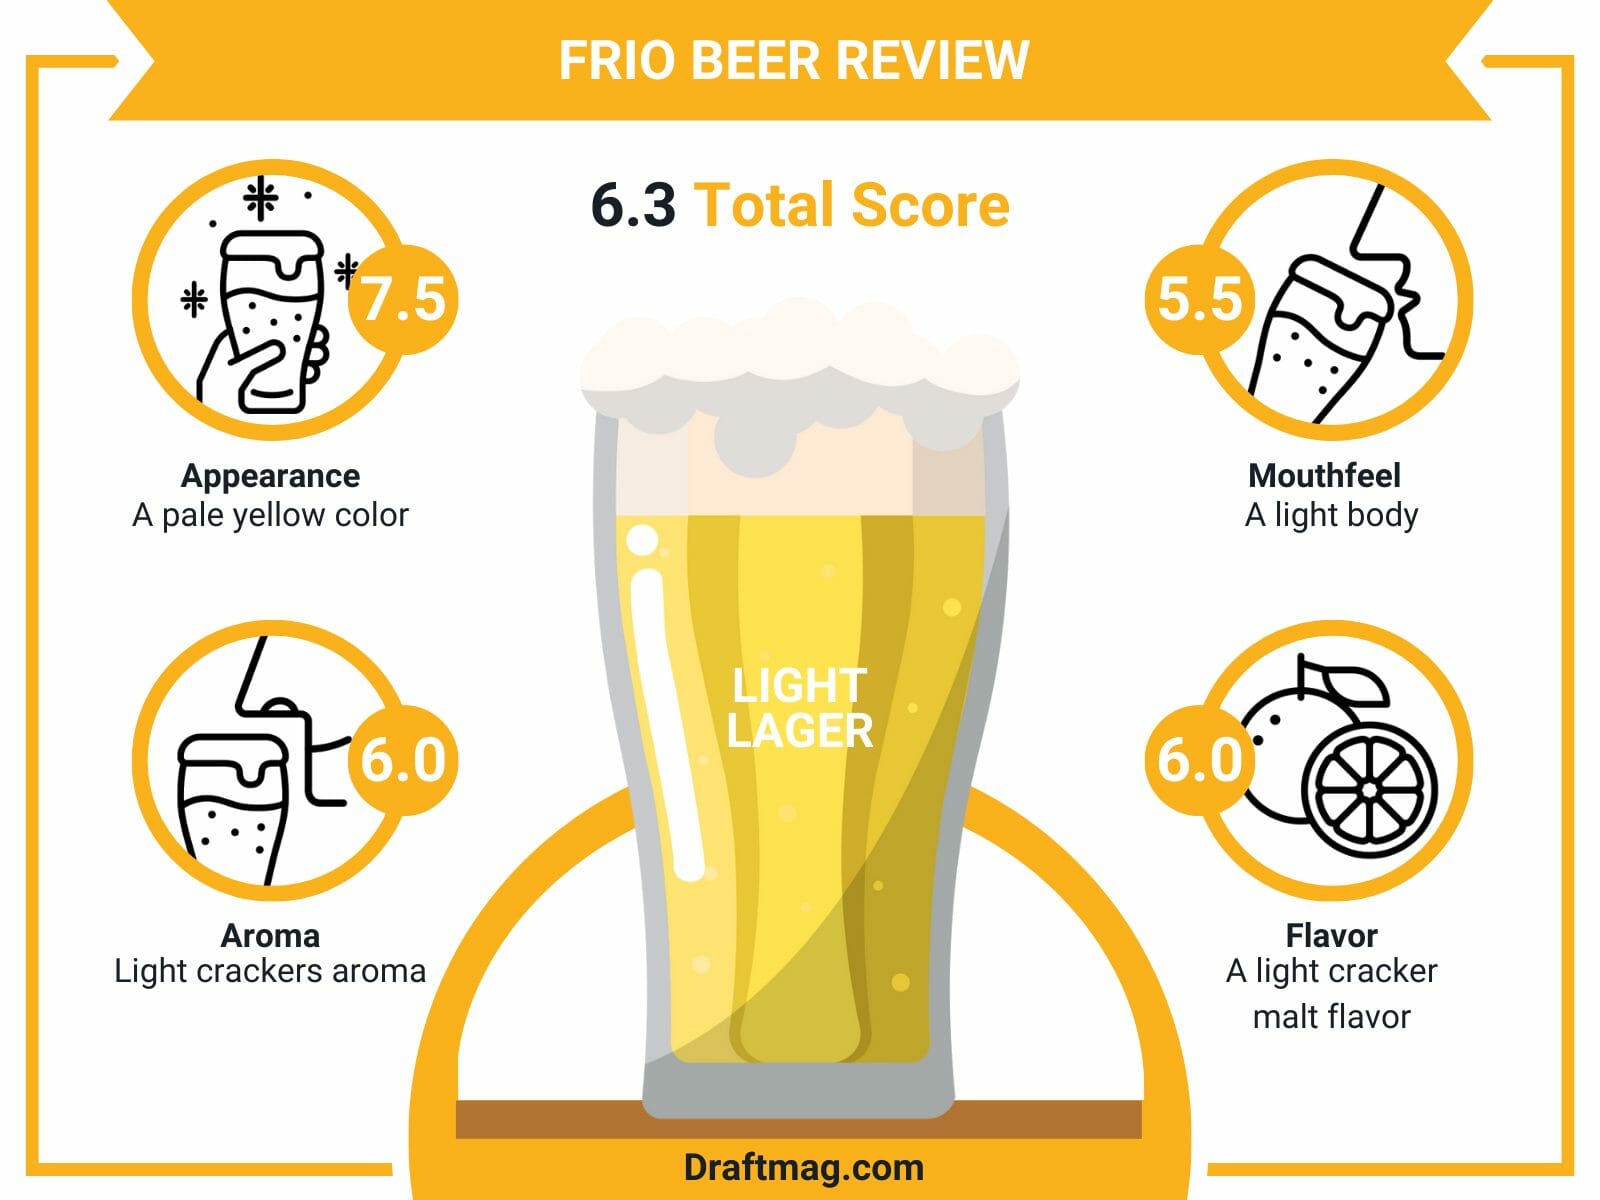 Frio beer review infographic